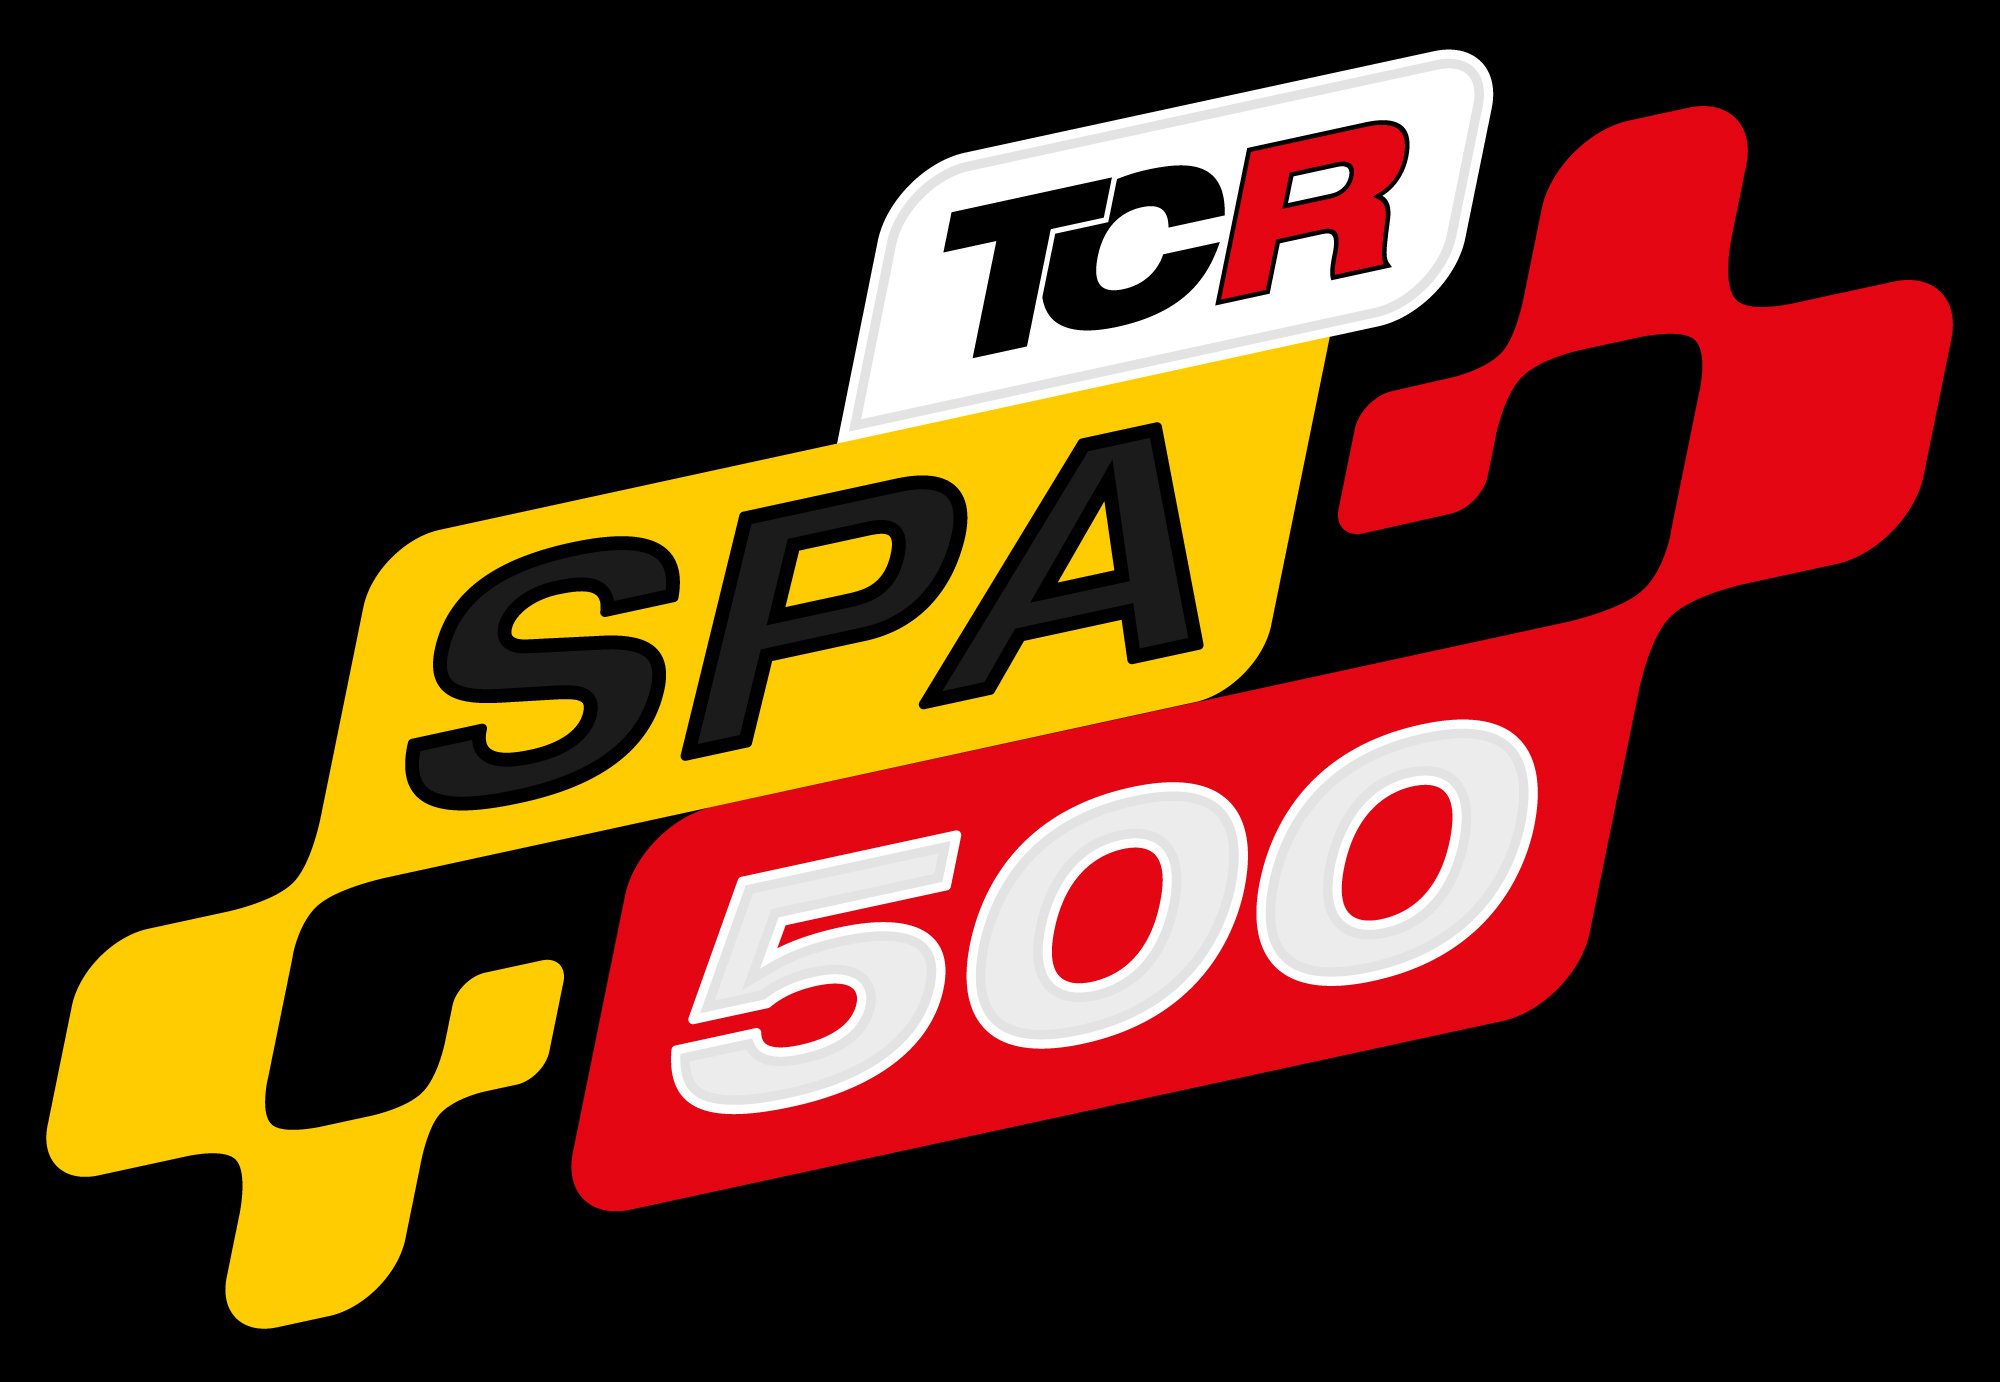 TCR SPA 500